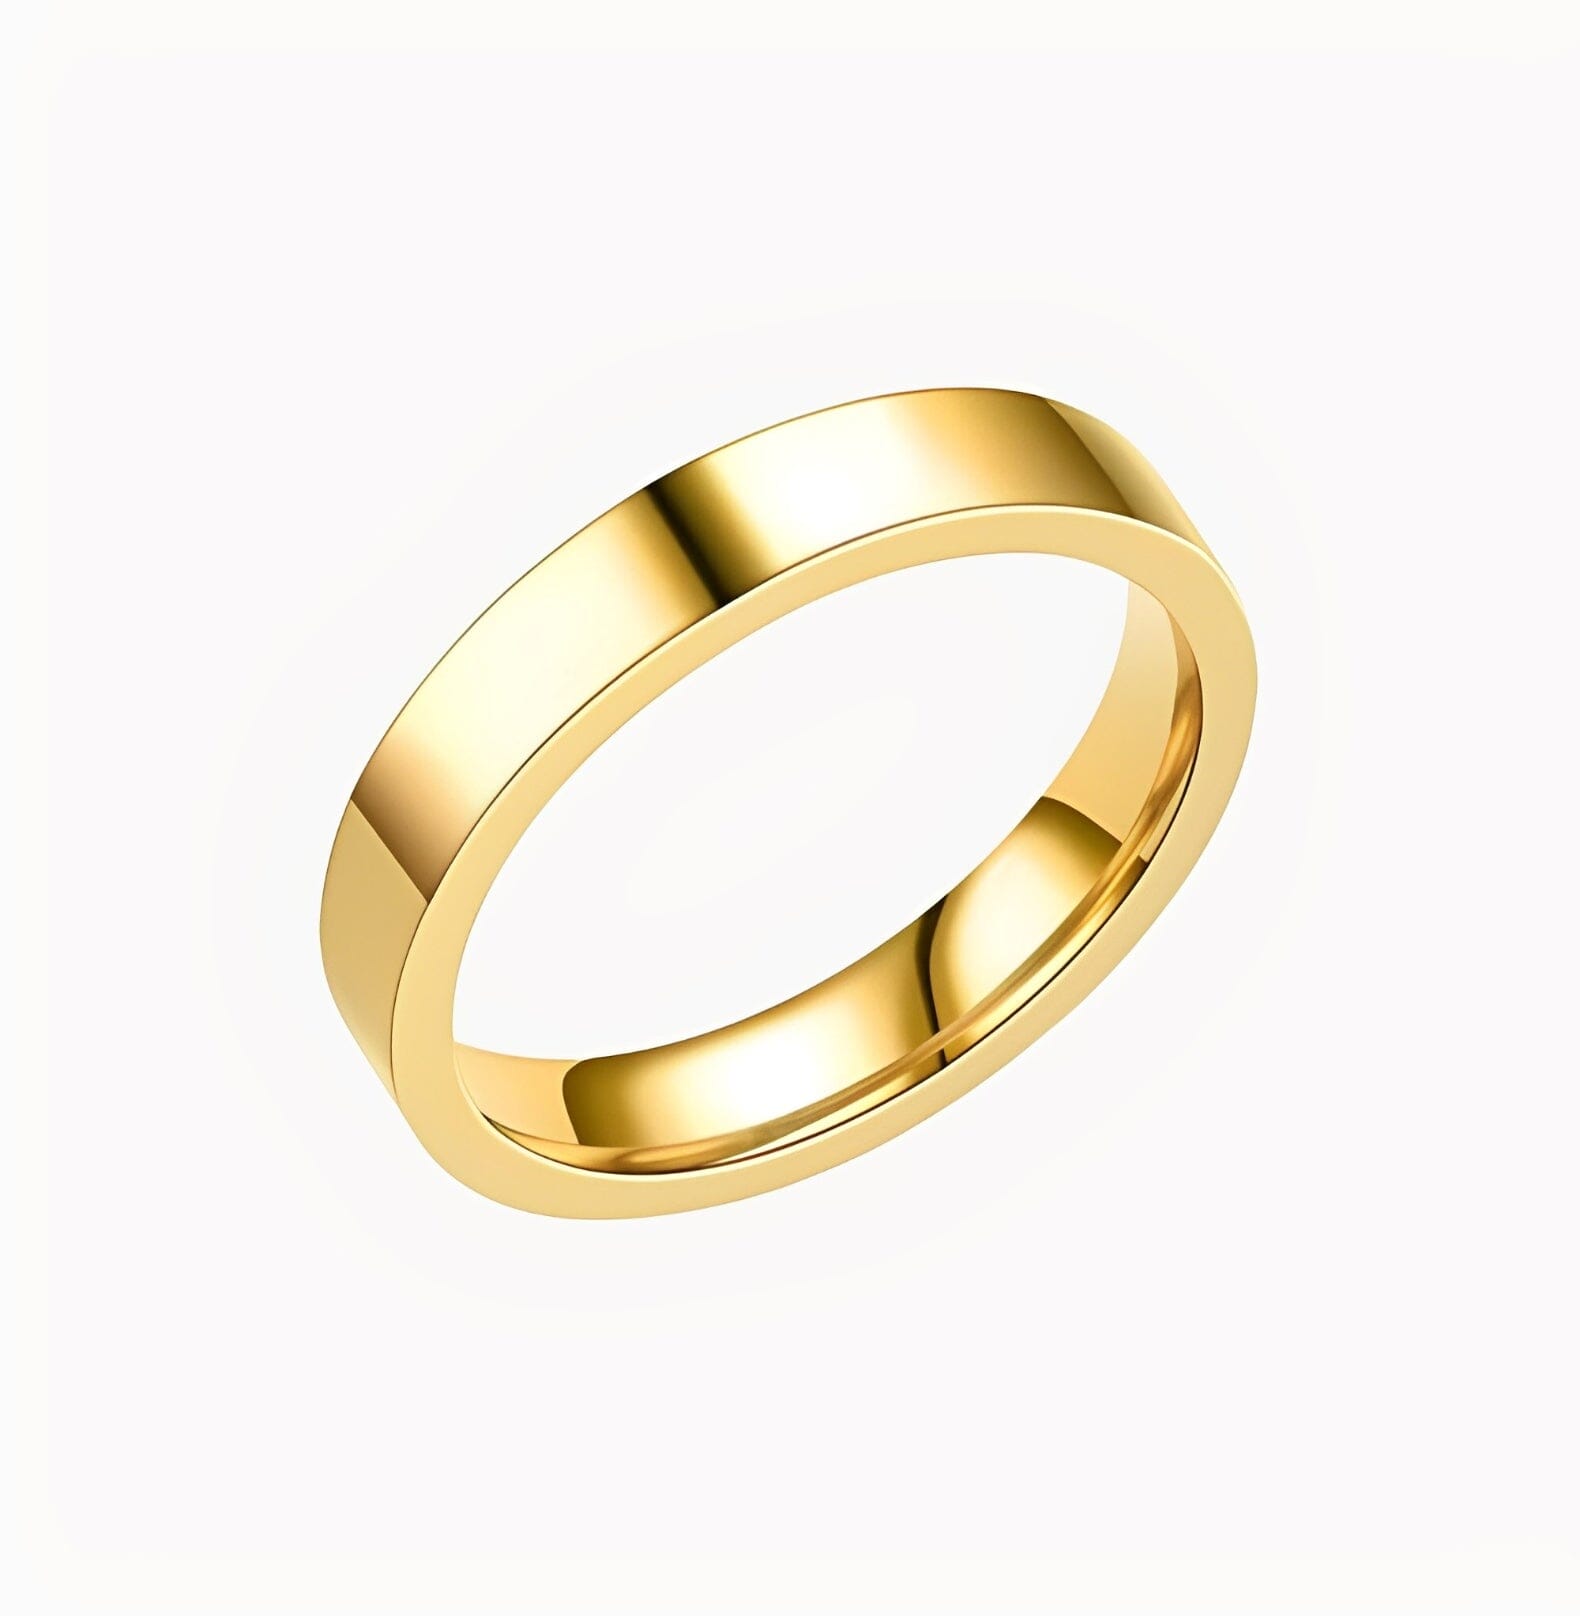 CLASSIC BAND RING ring Yubama Jewelry Online Store - The Elegant Designs of Gold and Silver ! 